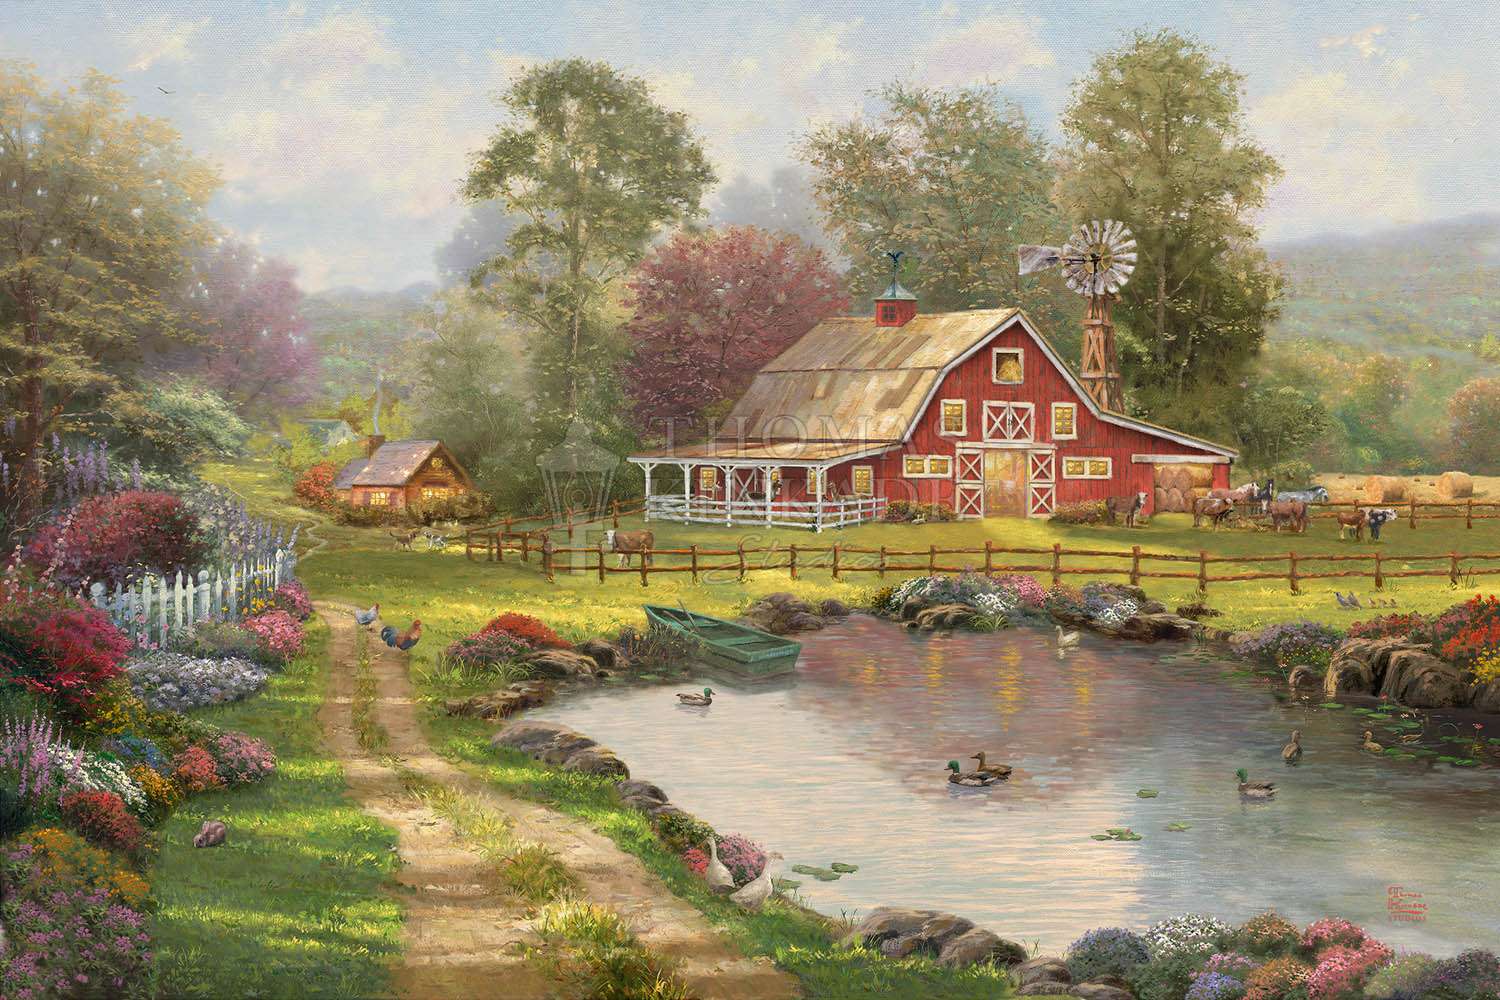 Red Barn Retreat online puzzle